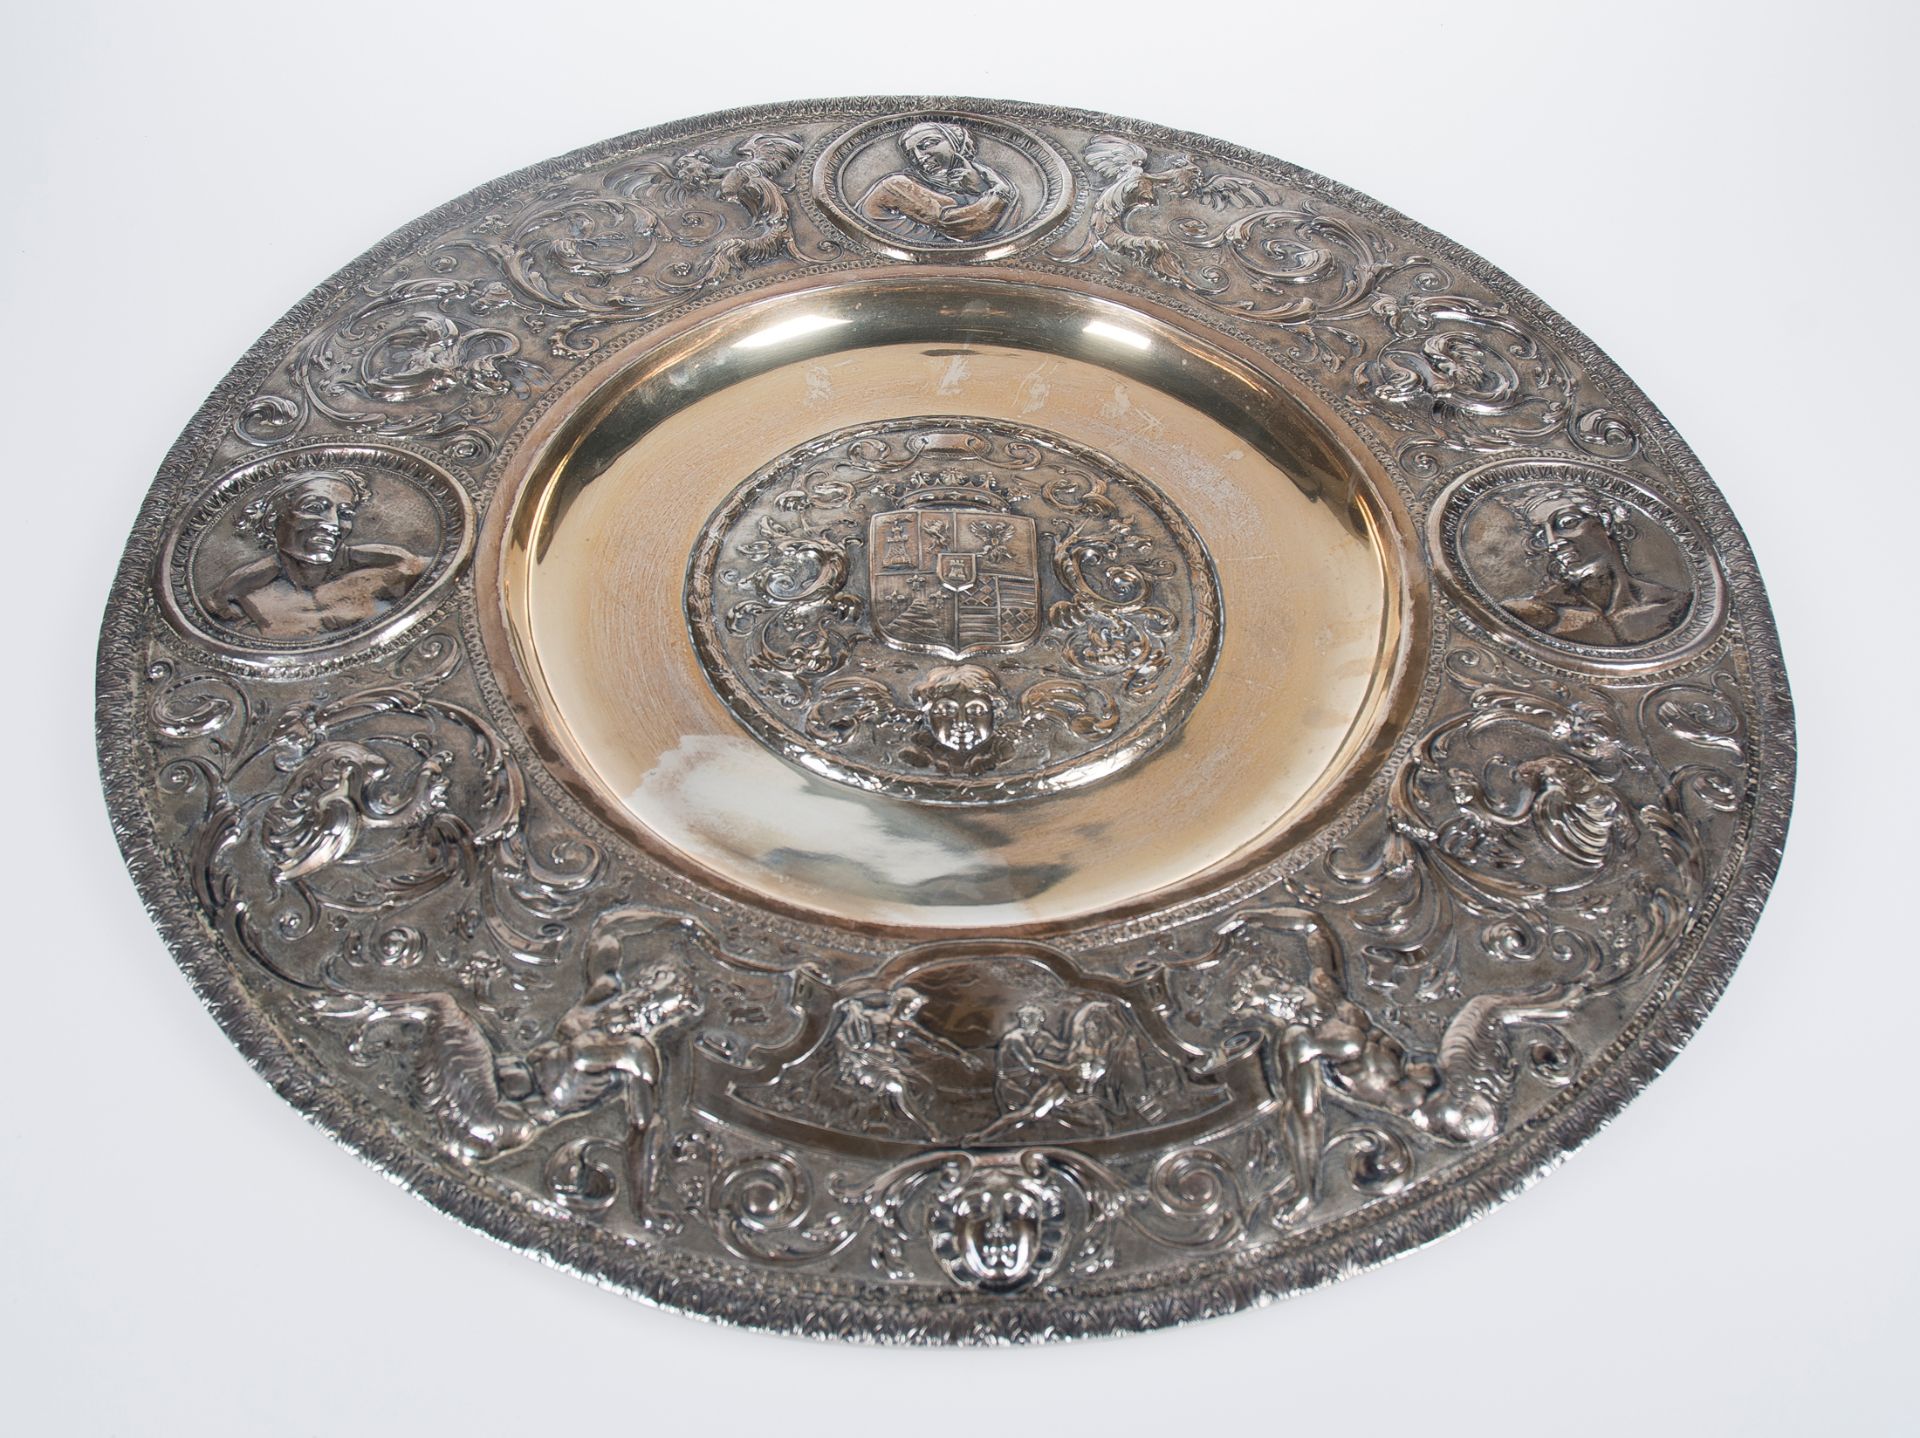 Large, embossed and chased silver plate. 19th century. - Image 2 of 7